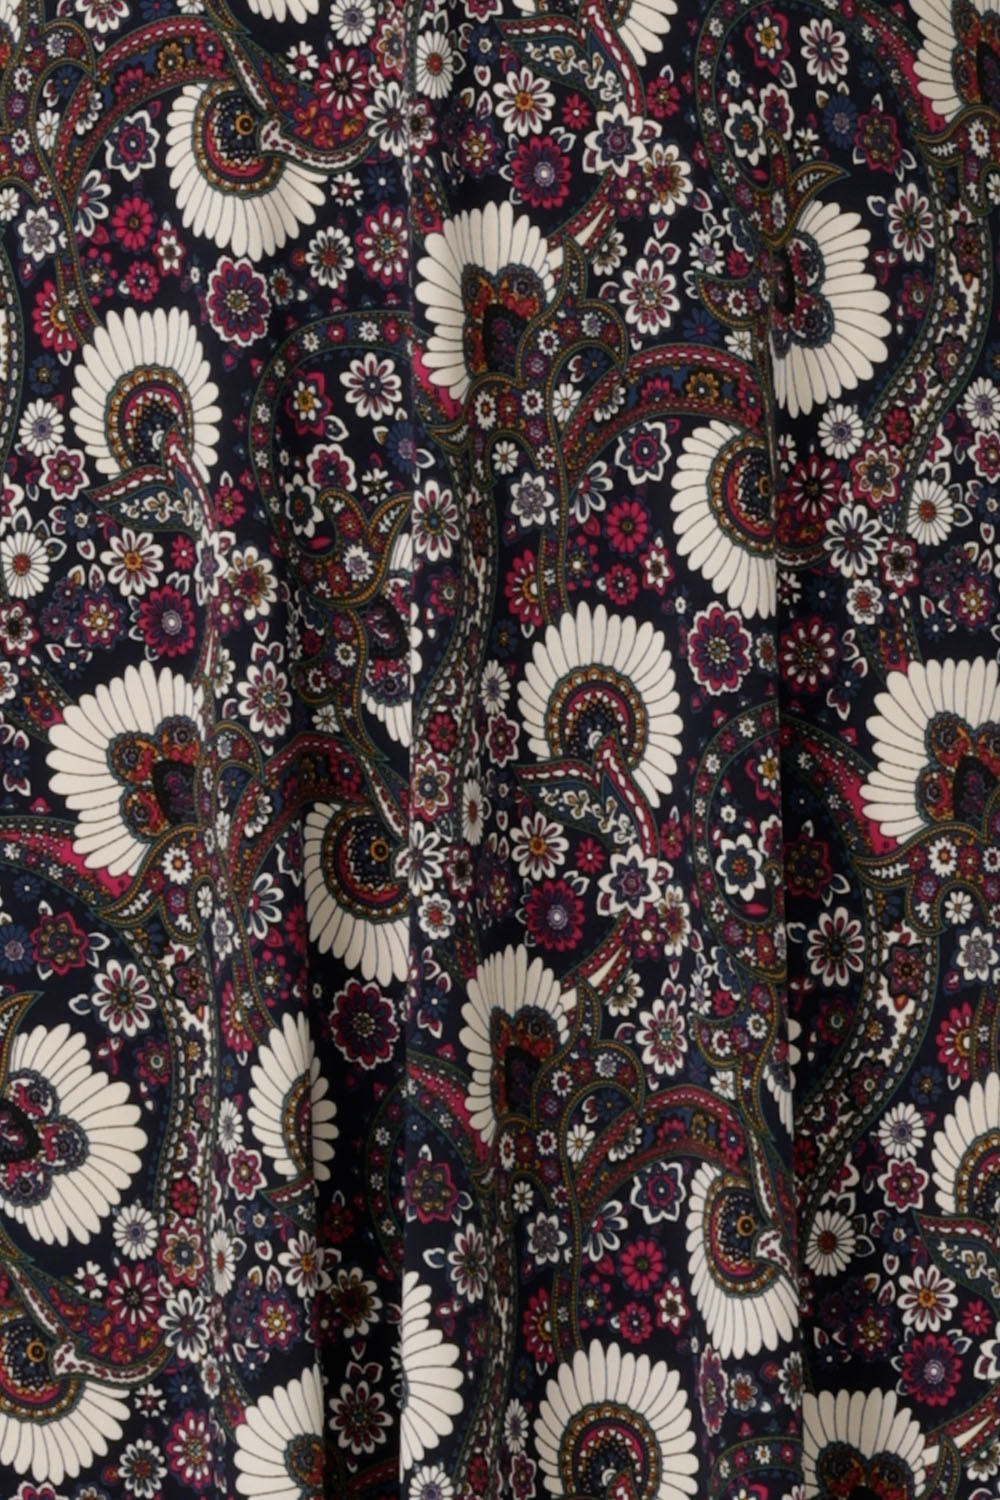 swatch of Australian and New Zealand women's fashion label, L&F's paisley Midori print on dry touch jersey used to make a range of women's wrap dresses and maxi dresses